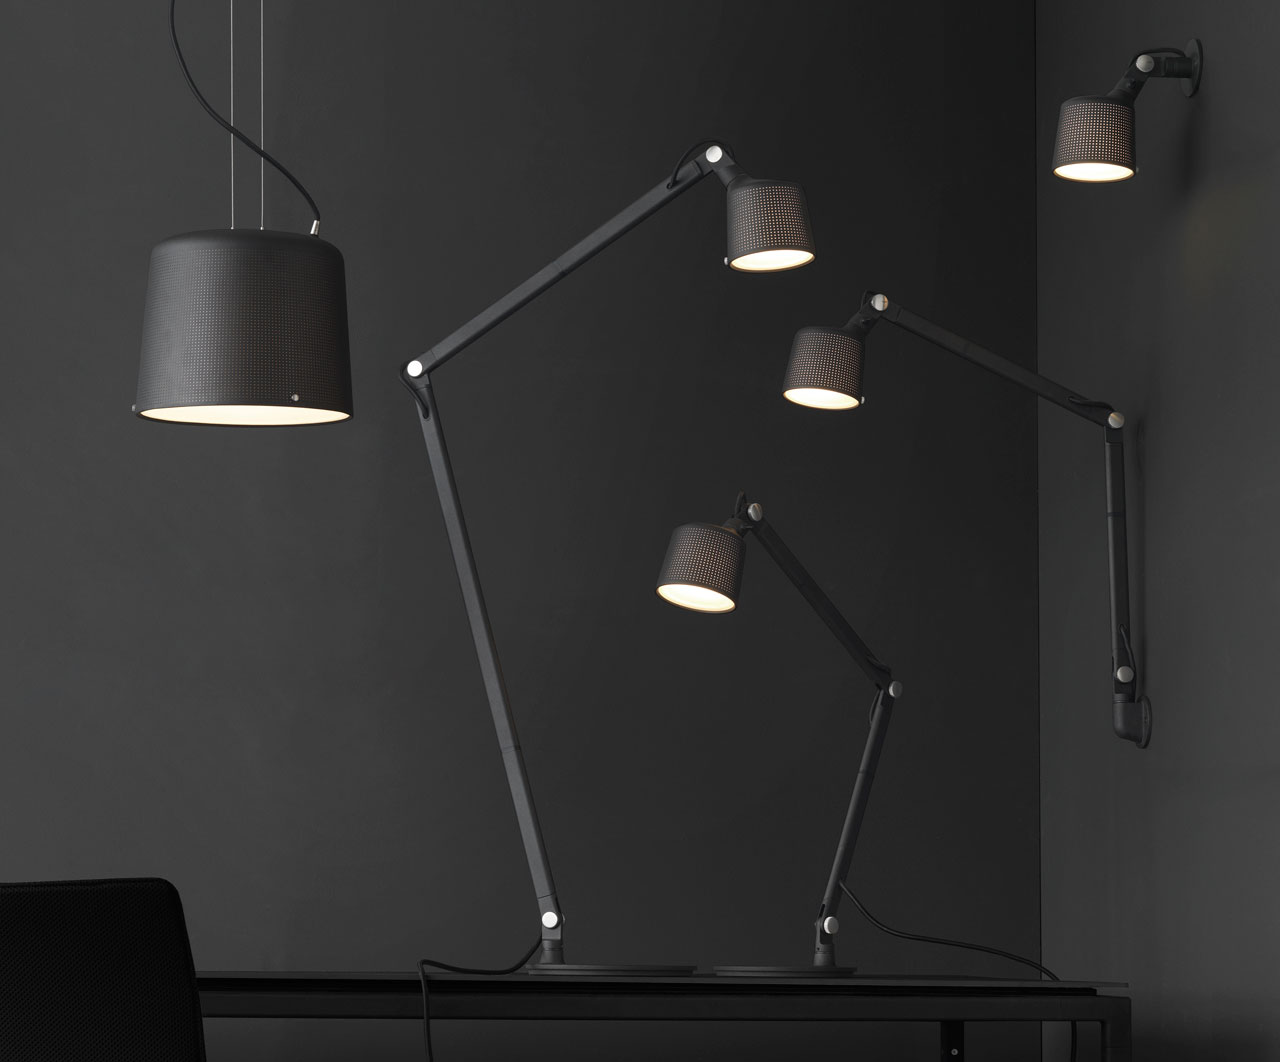 A Look at Vipp’s Collection of Timeless Lighting